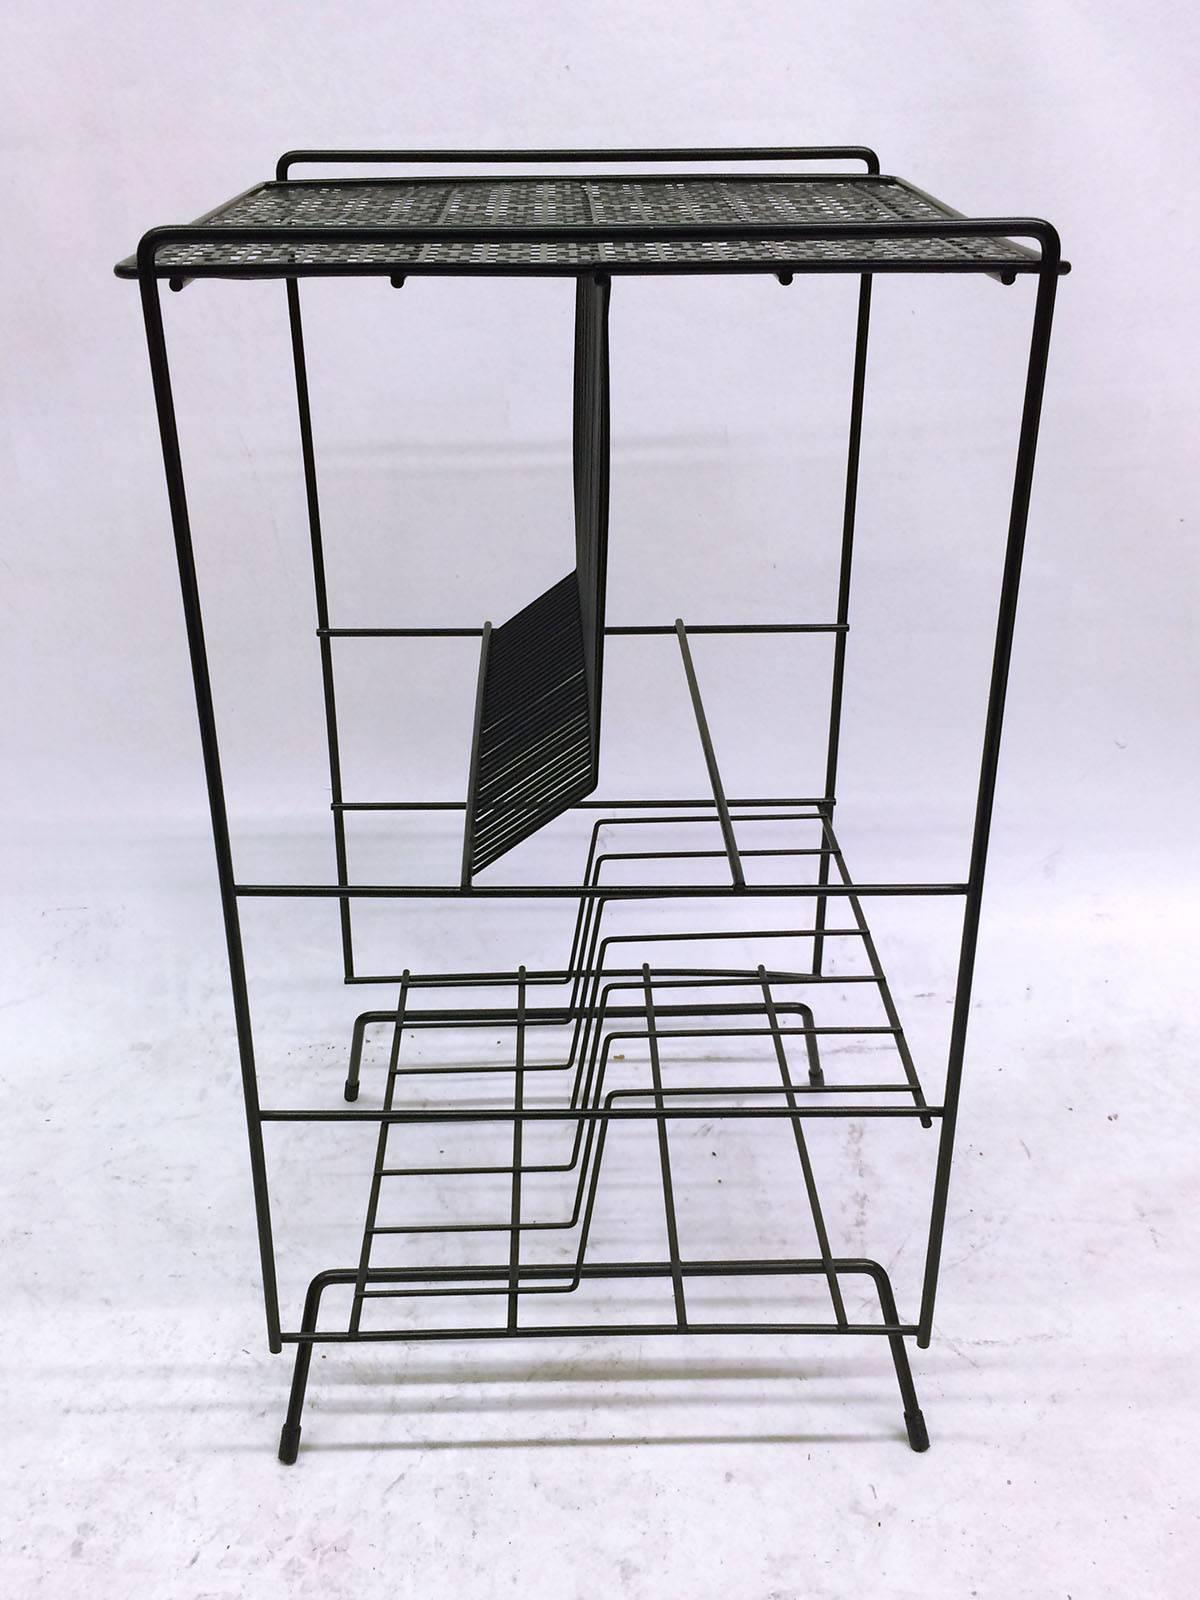 This Mid-Century bent steel media/record stand is powder coated. The stand has a flat surface on the top for a player, and two shelves for records one for single records and the other for groupings.